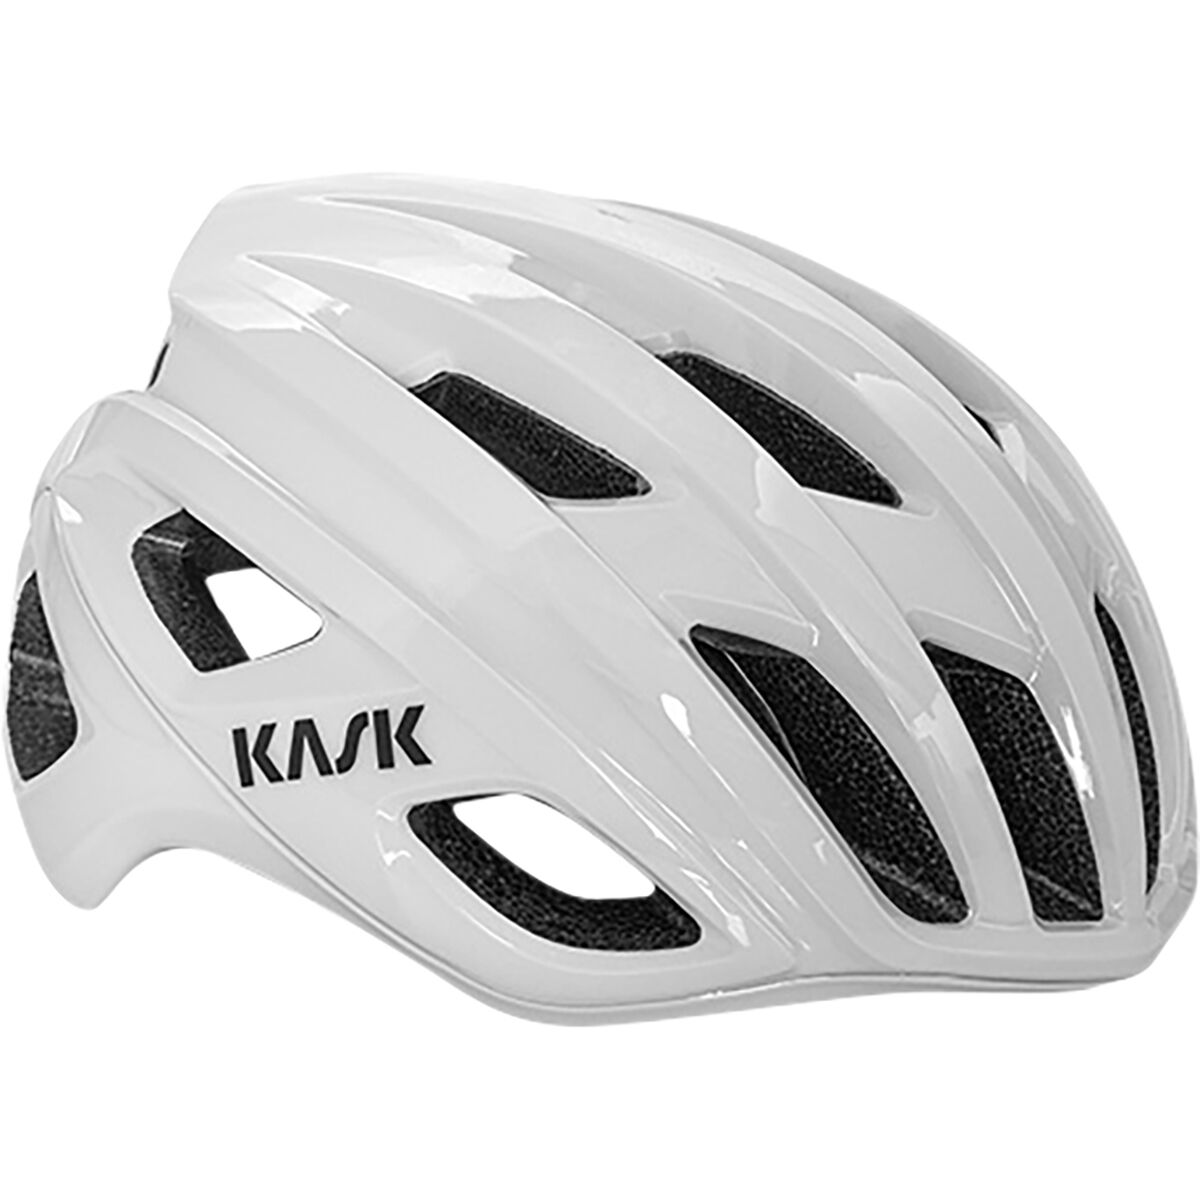 Kask Mojito Cubed - Men